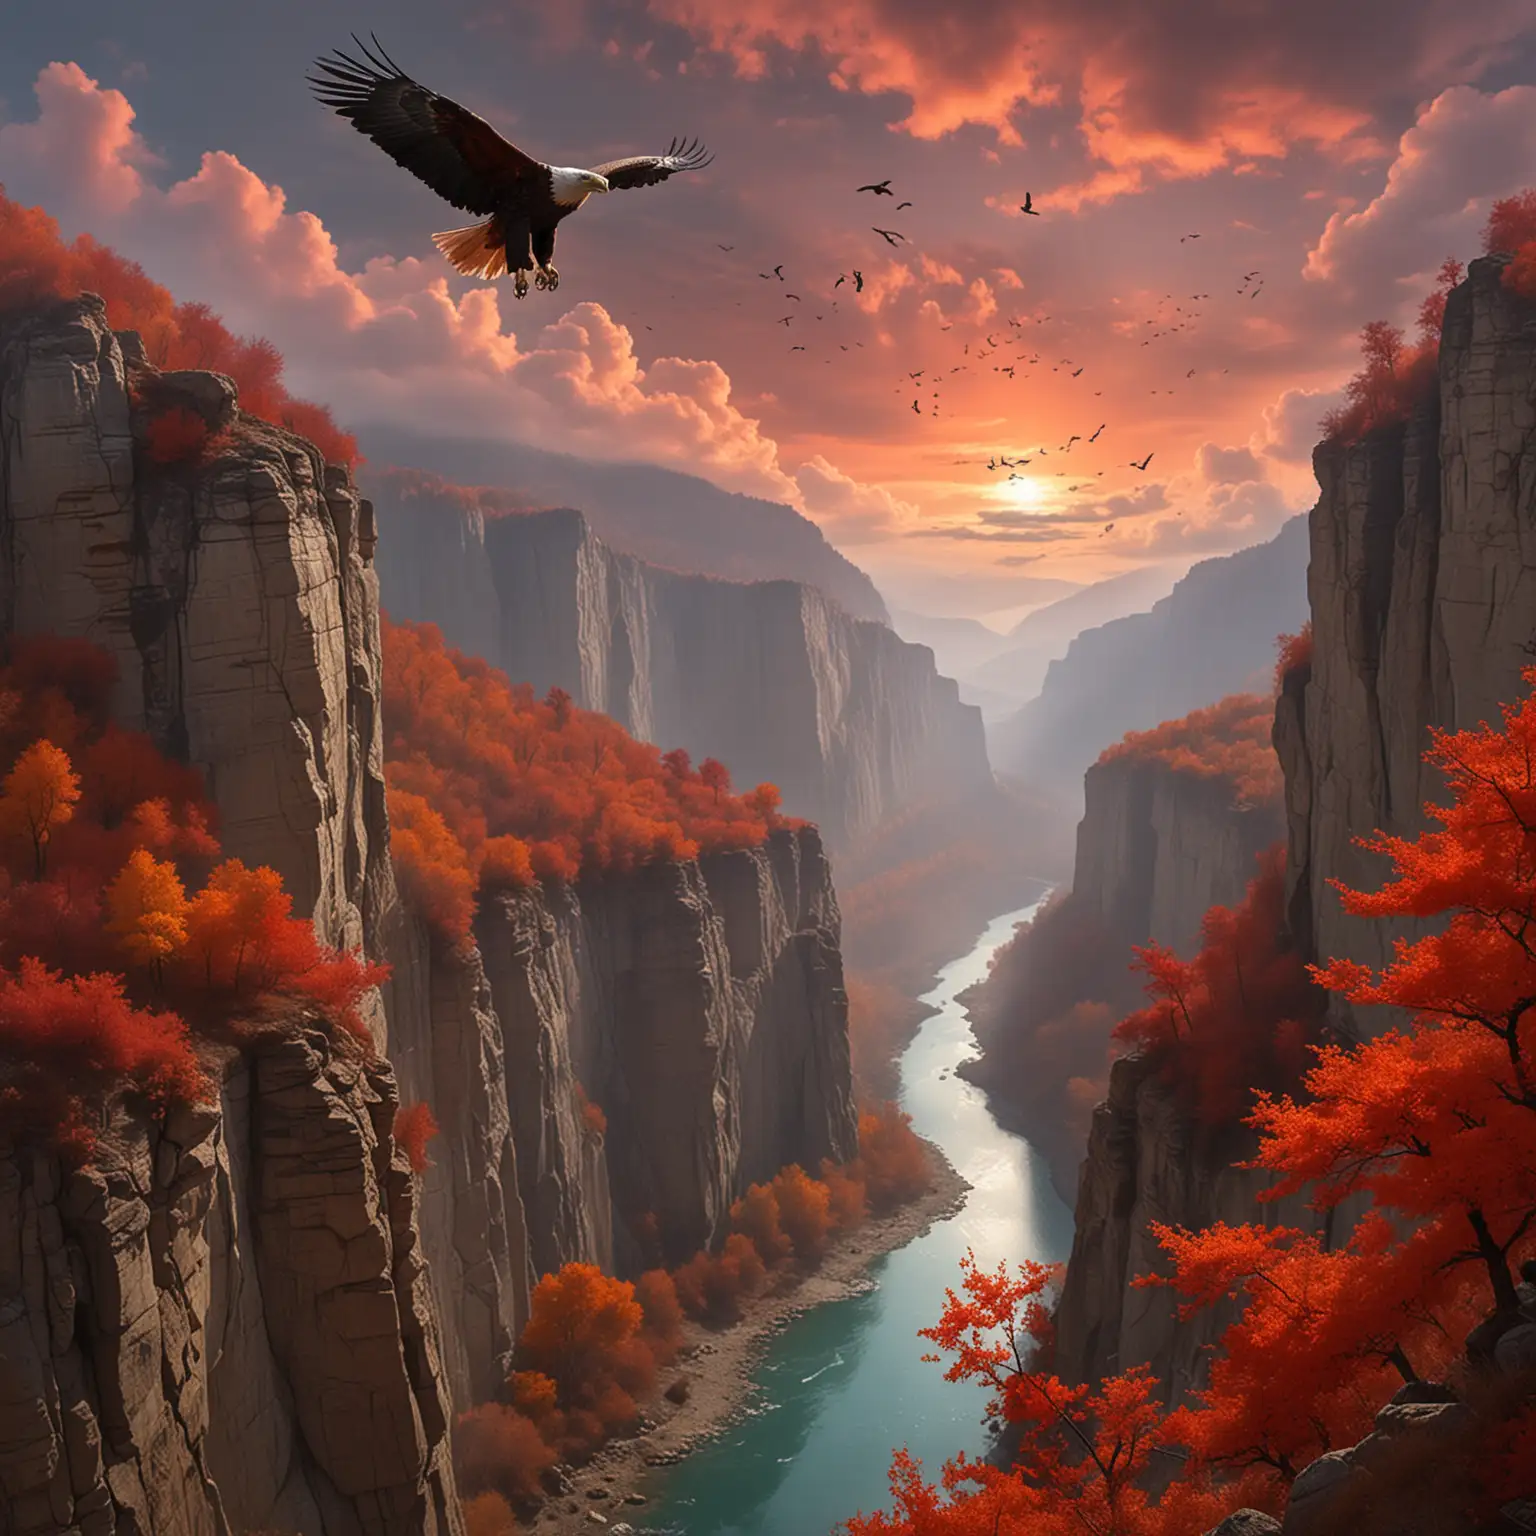 Autumn-Cliff-with-Eagle-and-Vermillion-Clouds